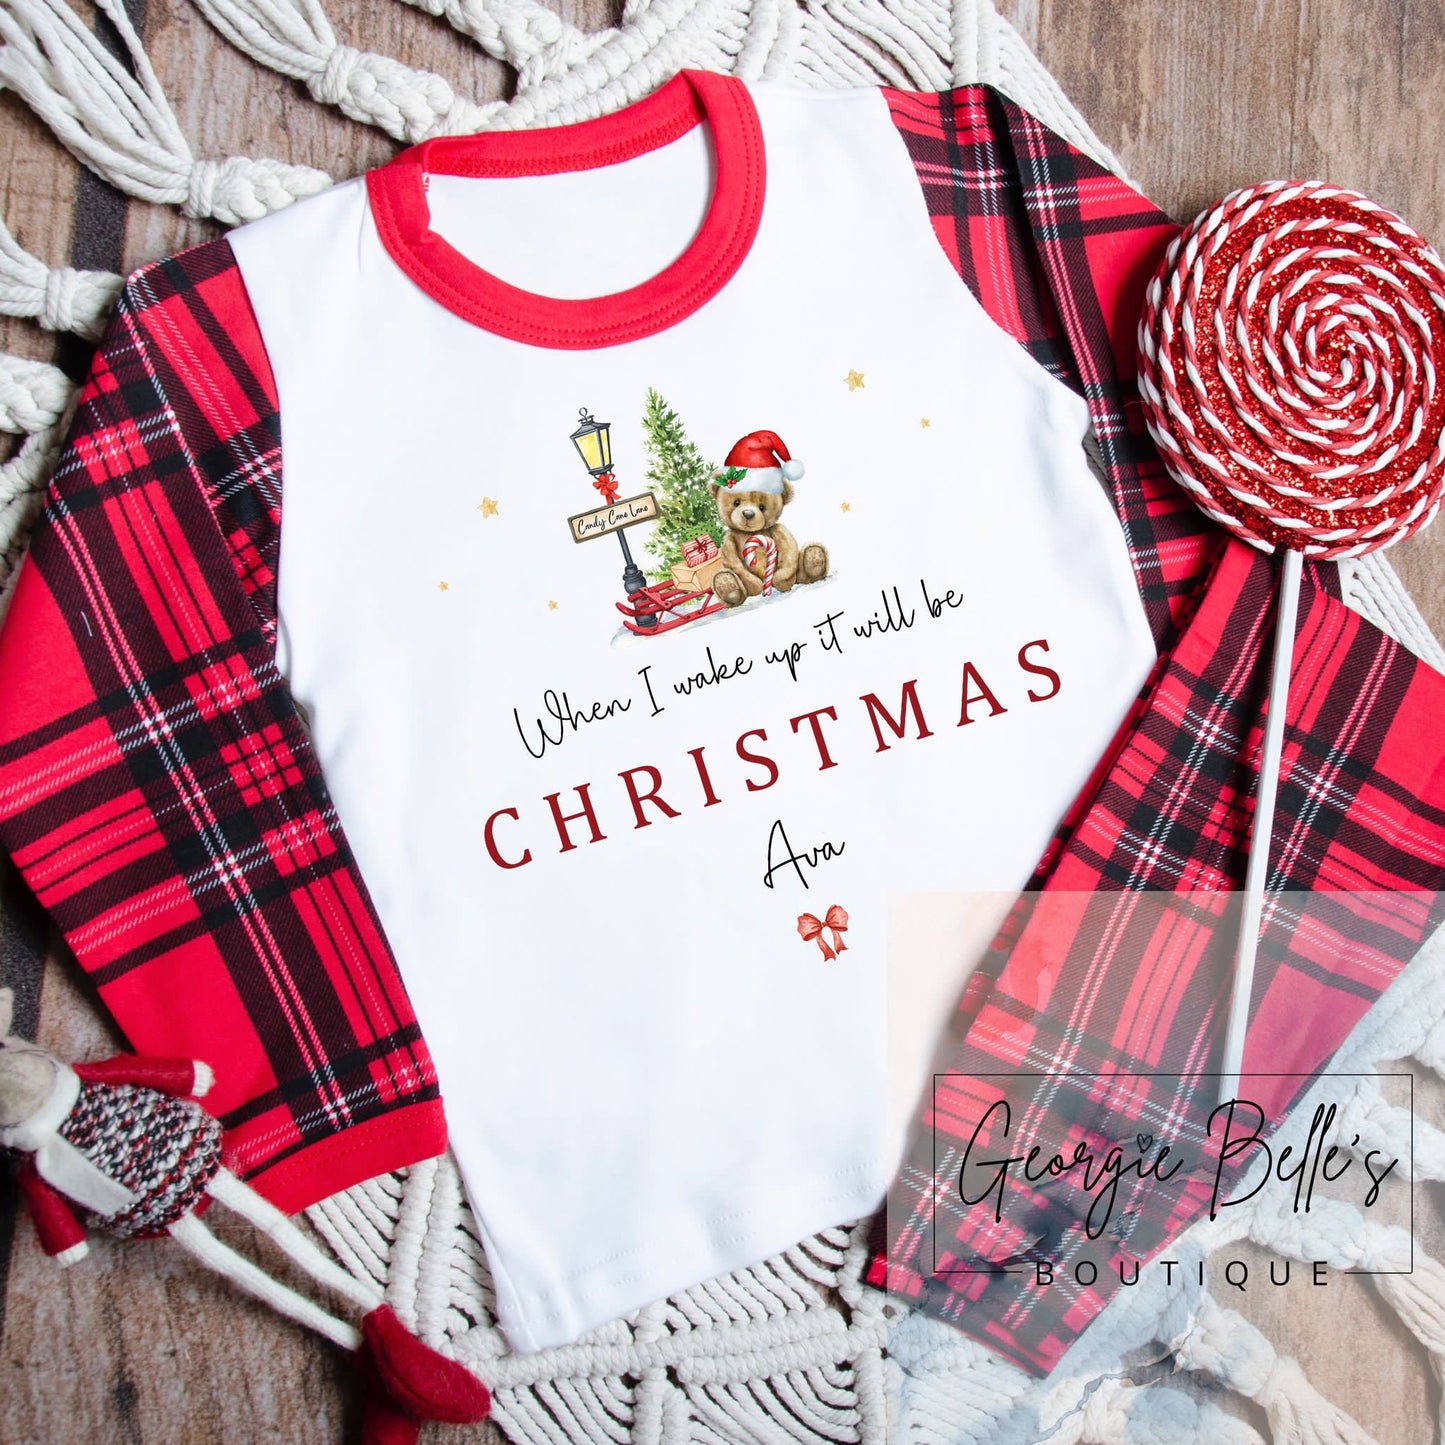 When I wake up it will be Christmas Personalised Unisex Pyjamas - Red Teddy Bear Design